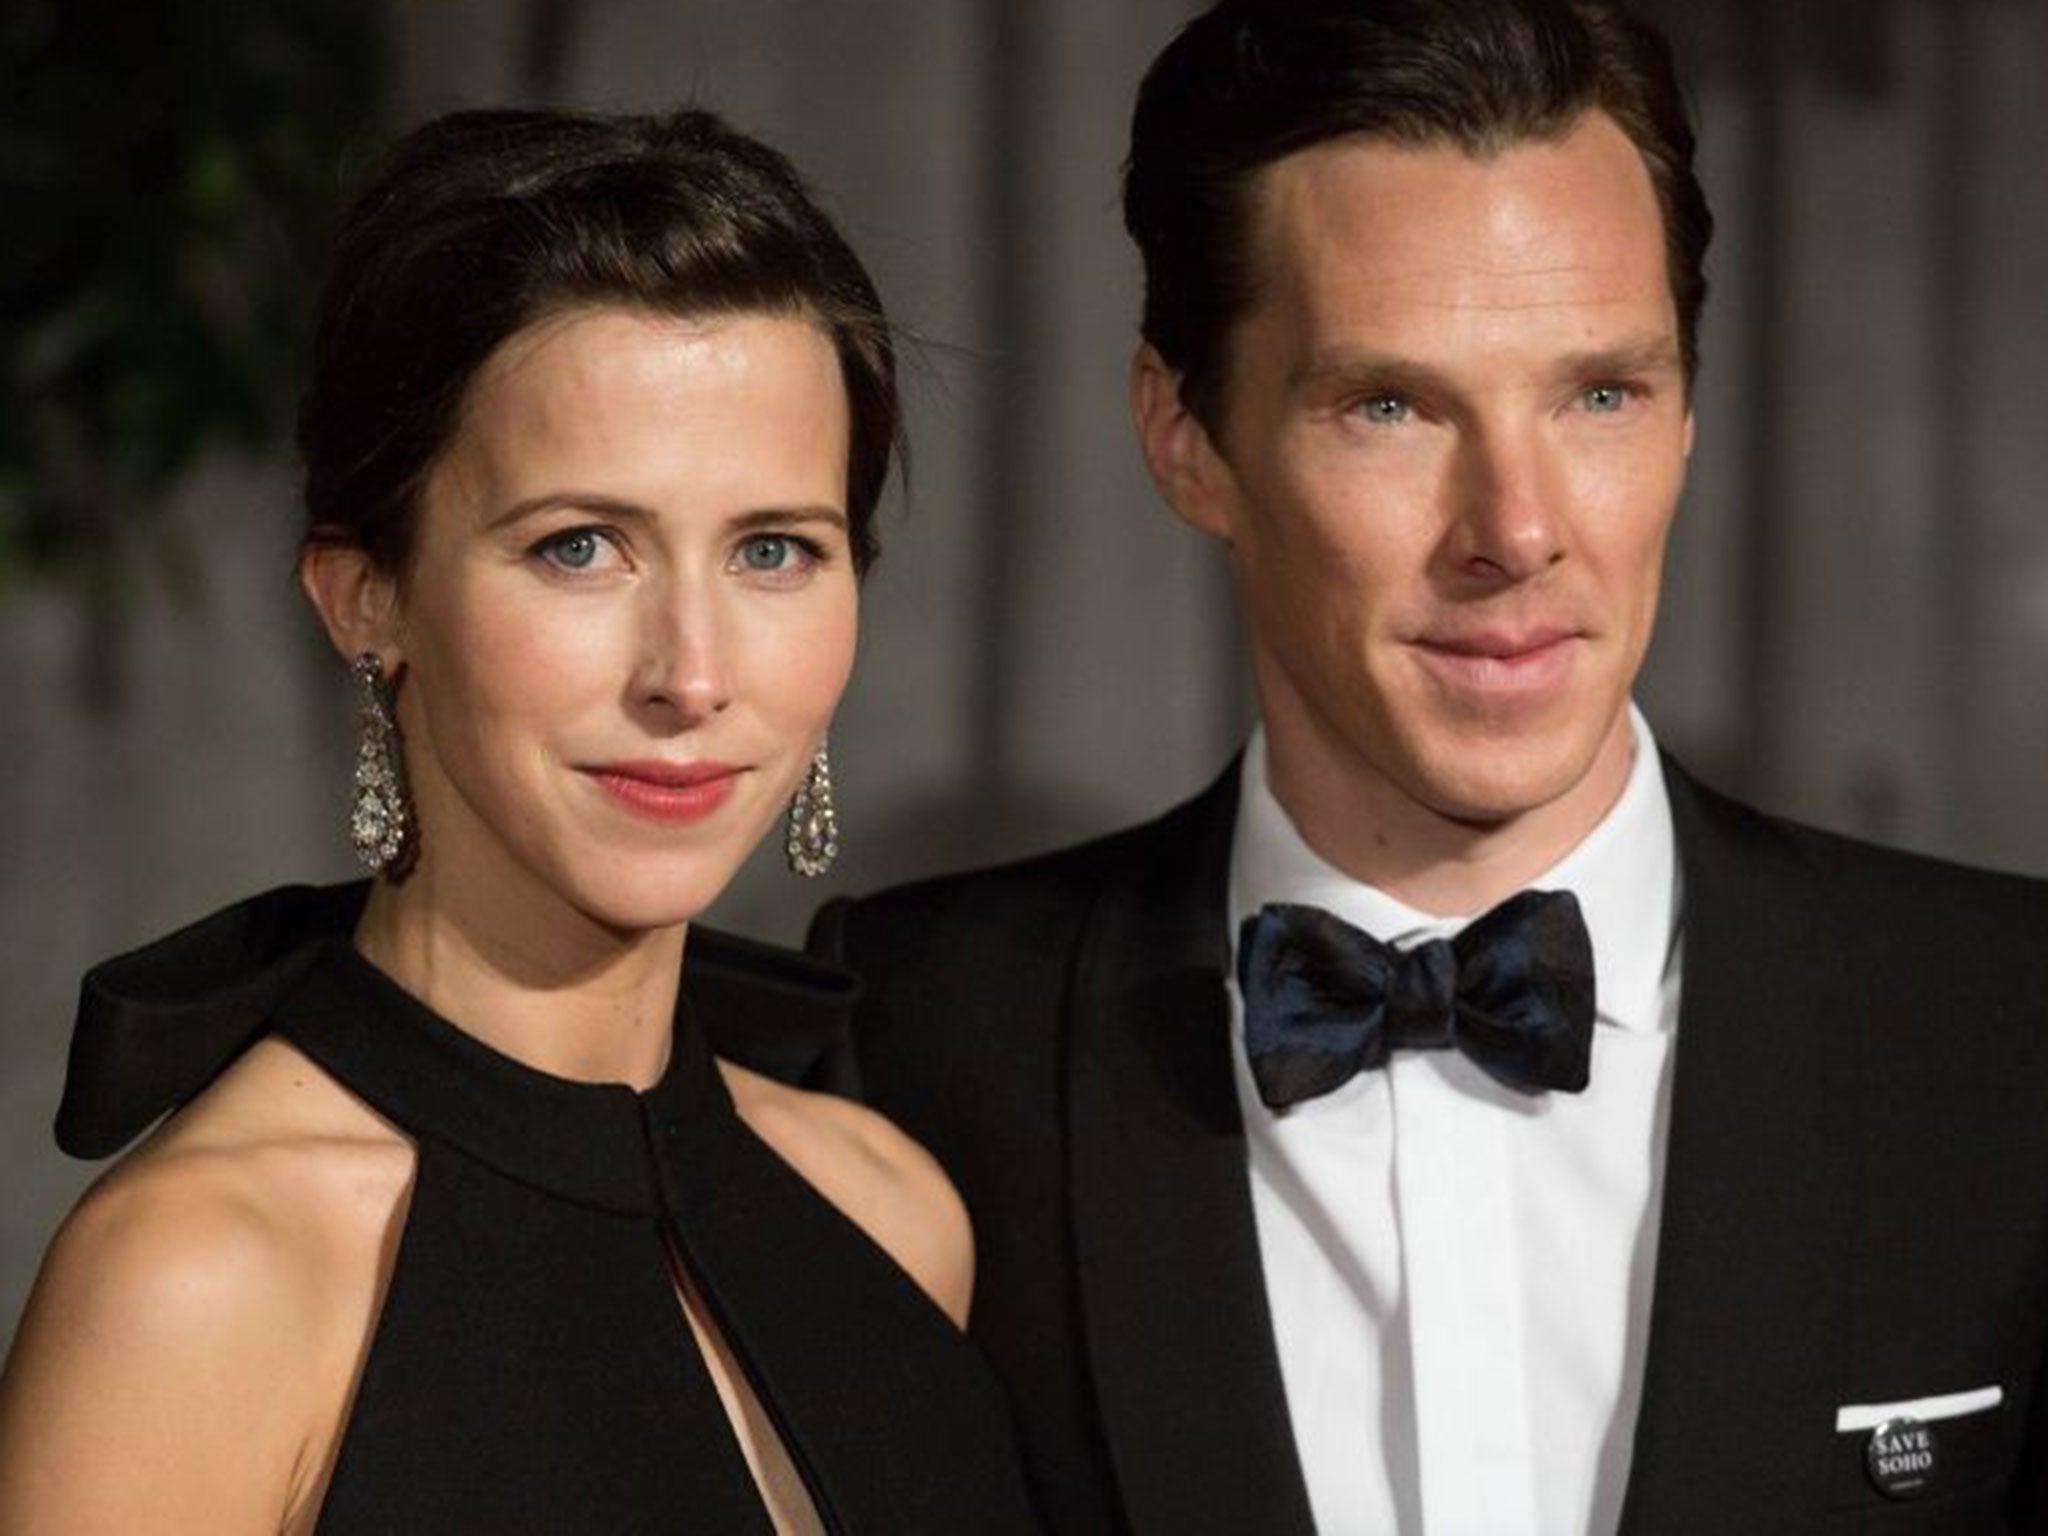 Sophie Hunter and Benedict Cumberbatch who are to marry this weekend